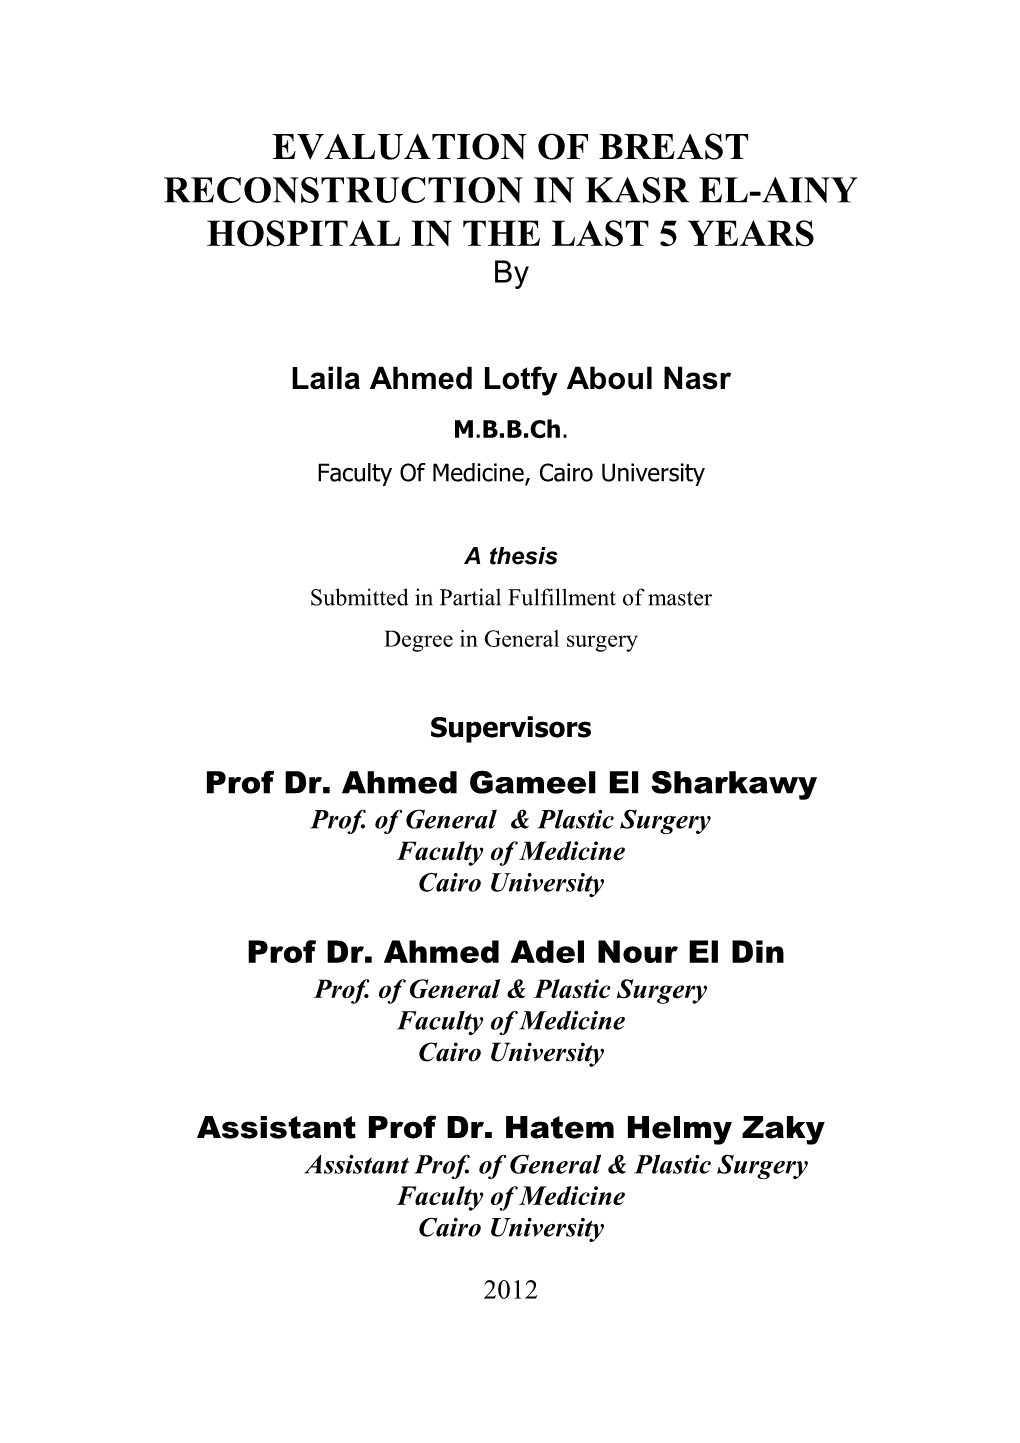 EVALUATION of BREAST RECONSTRUCTION in KASR EL-AINY HOSPITAL in the LAST 5 YEARS By